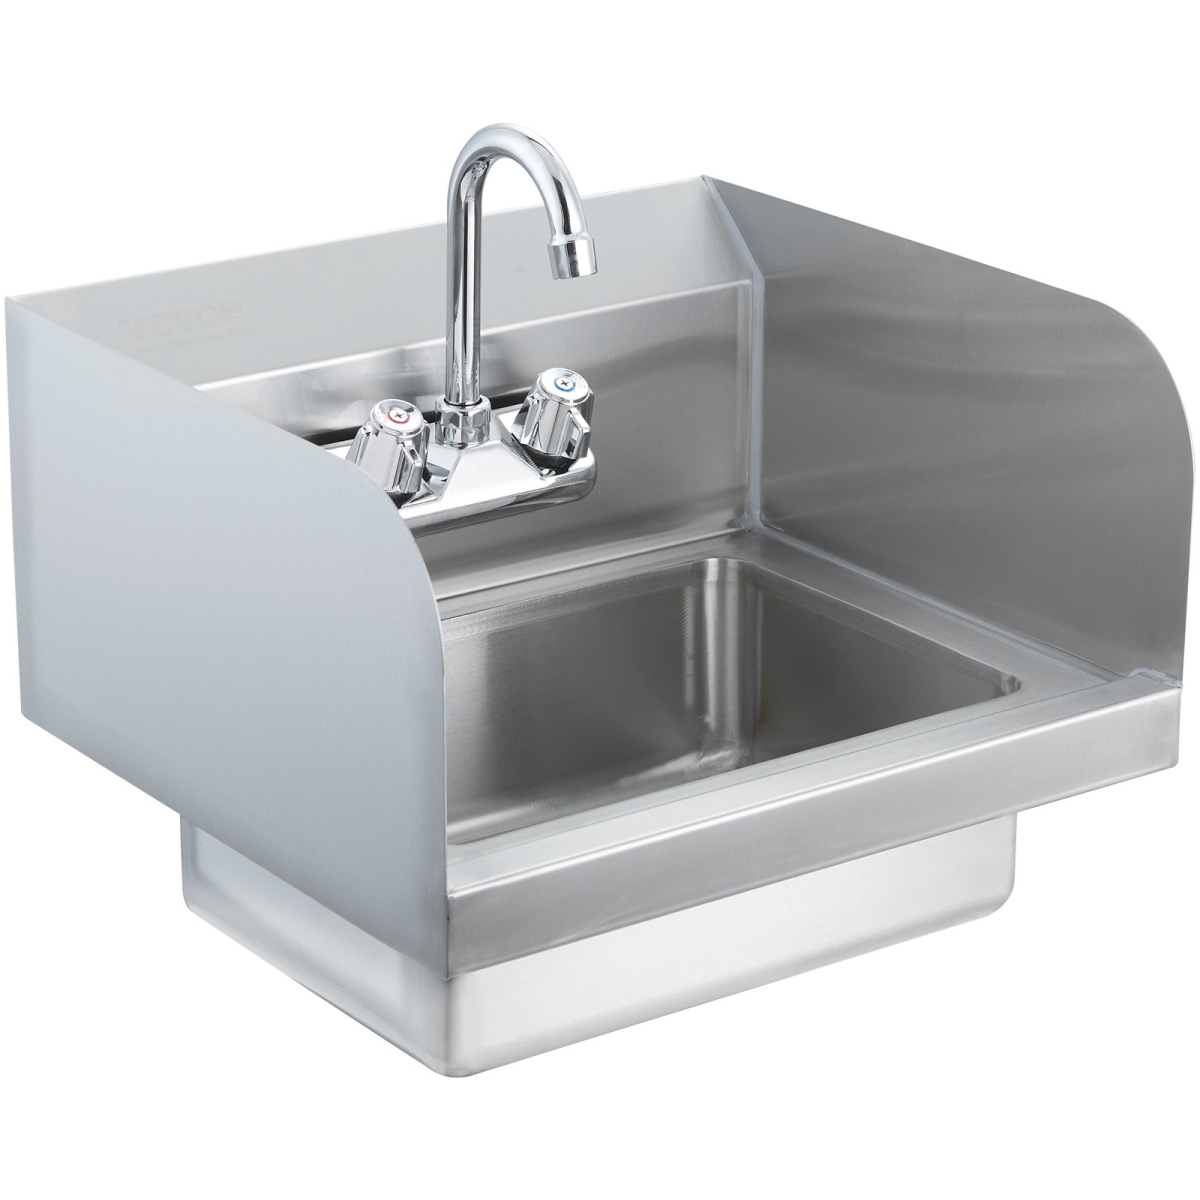 Picture of Vevor SYXSPYDSB14104S2GV0 17 x 12.8 in. Commercial Hand Sink NSF Stainless Steel Sink with Faucet & Side Splash Wall Mount Hand Basin